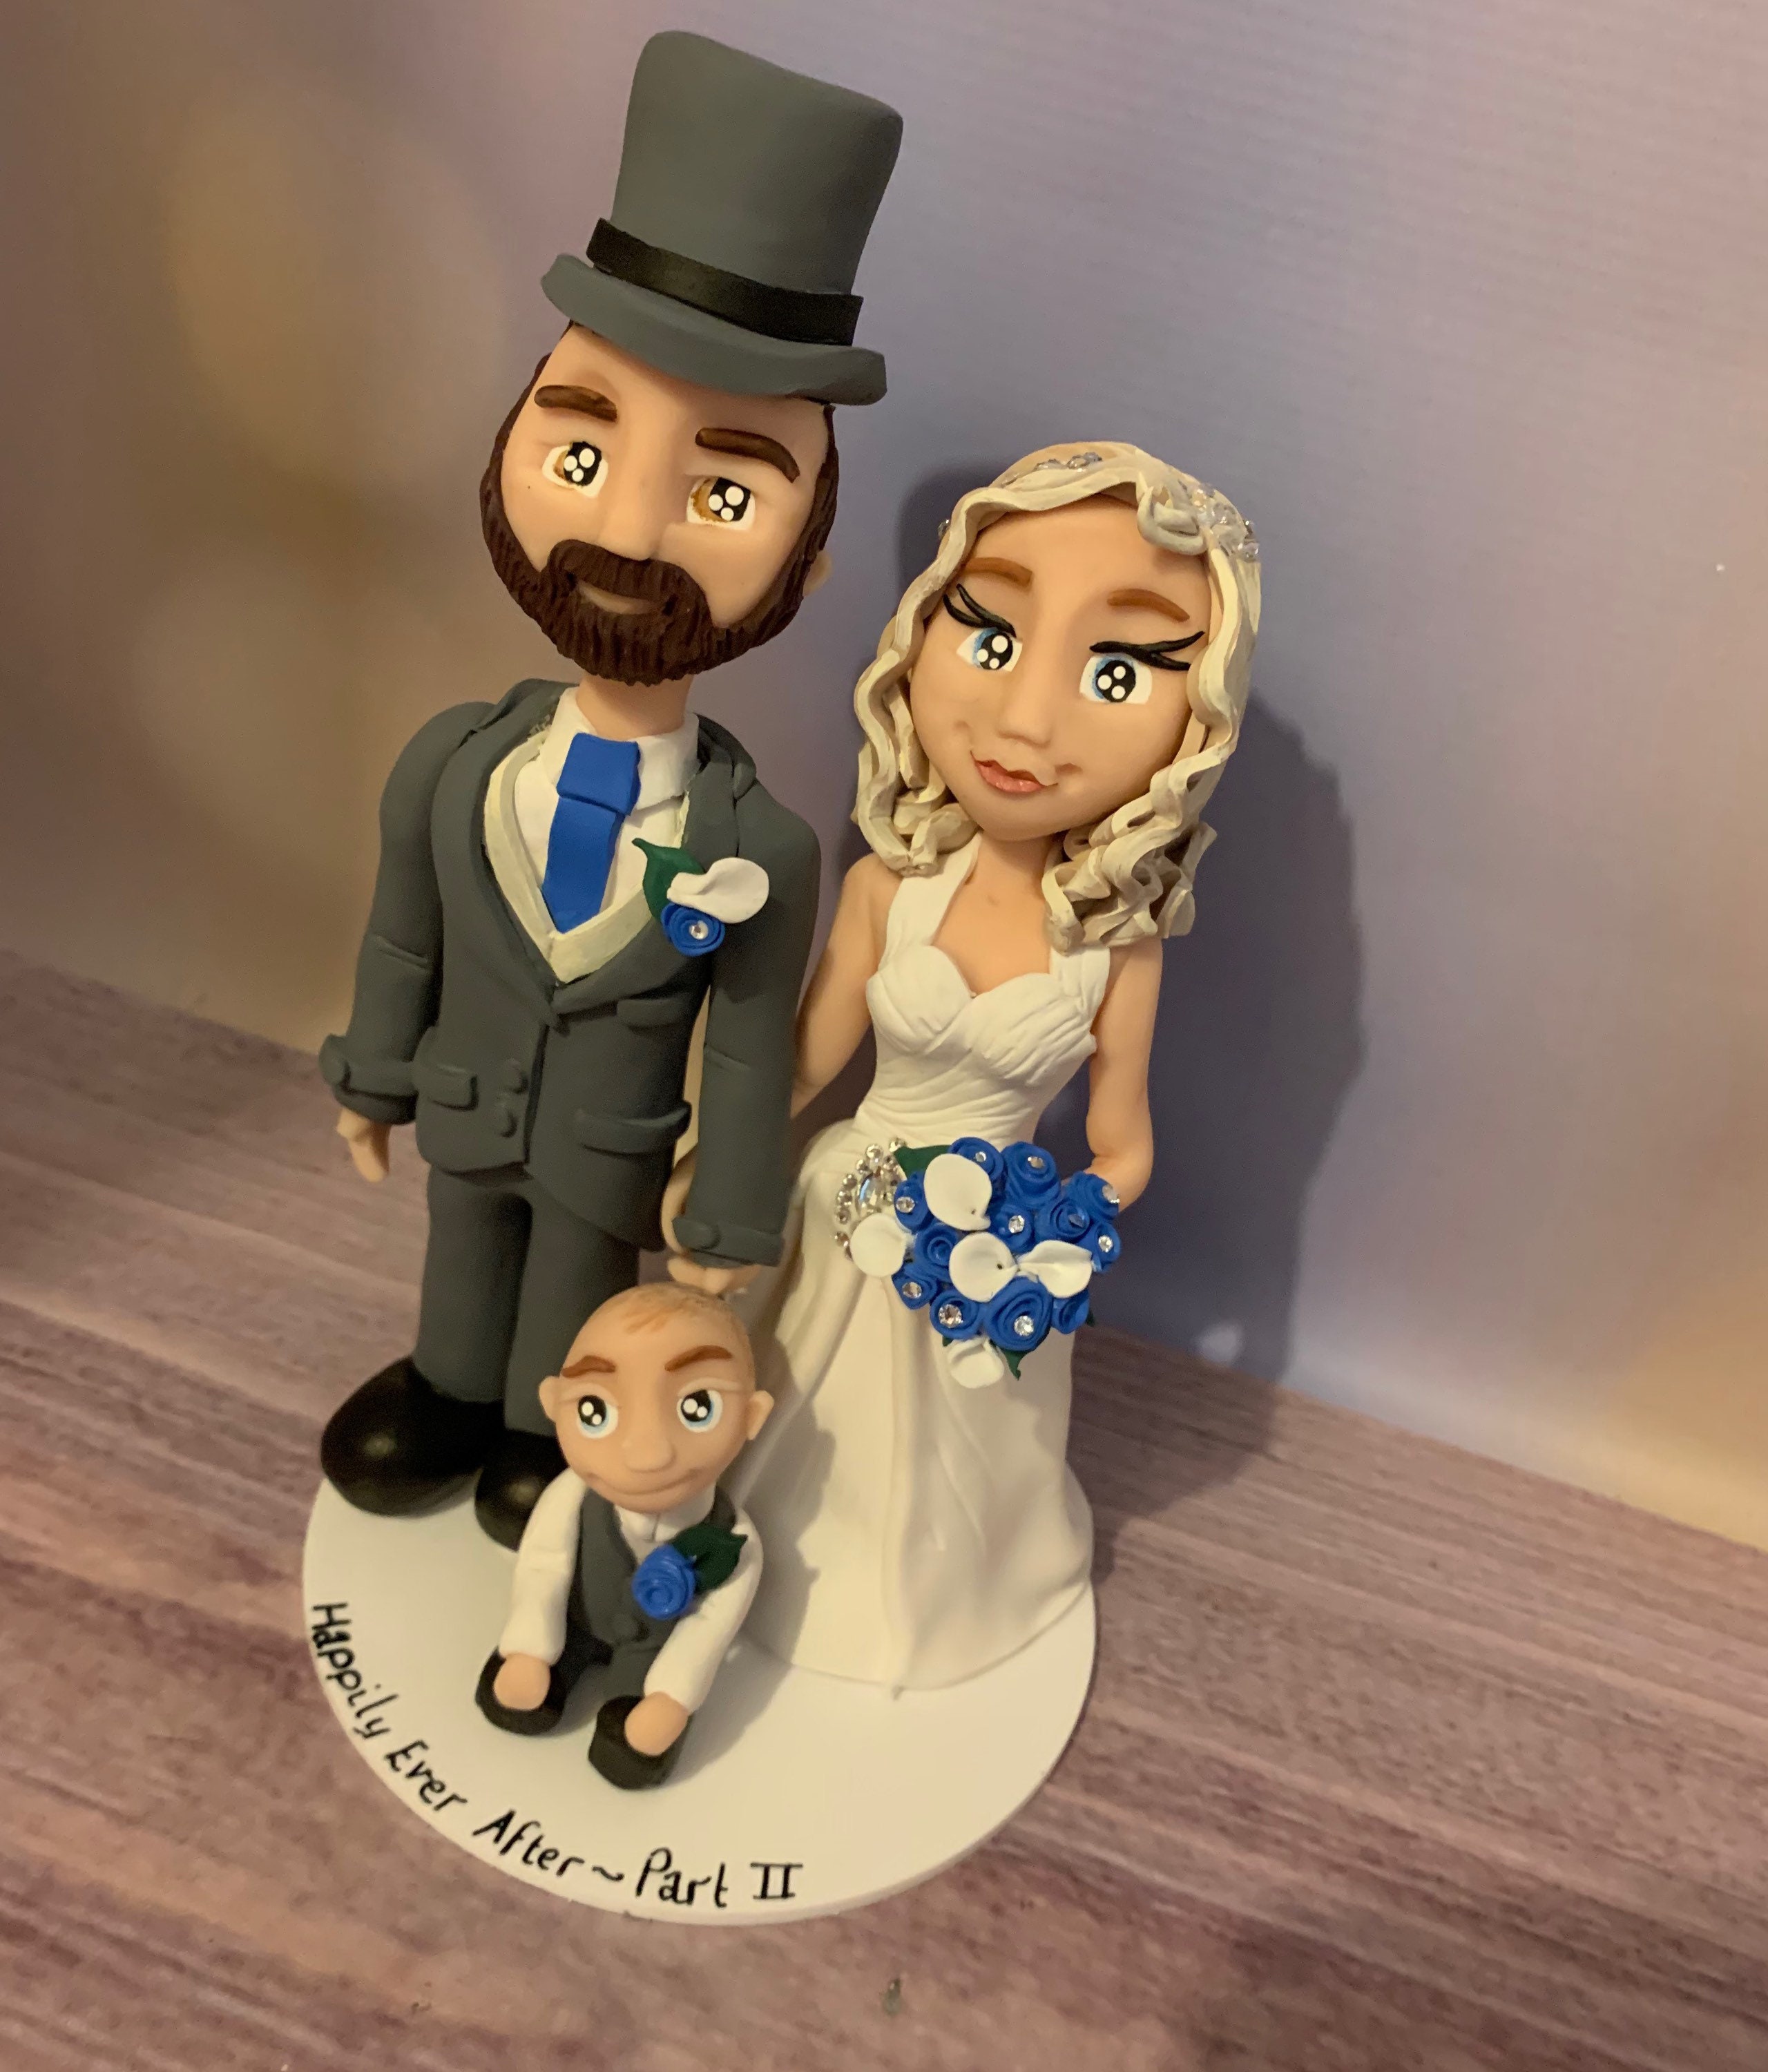 Personalised Wedding Cake Topper Figurines Bride And